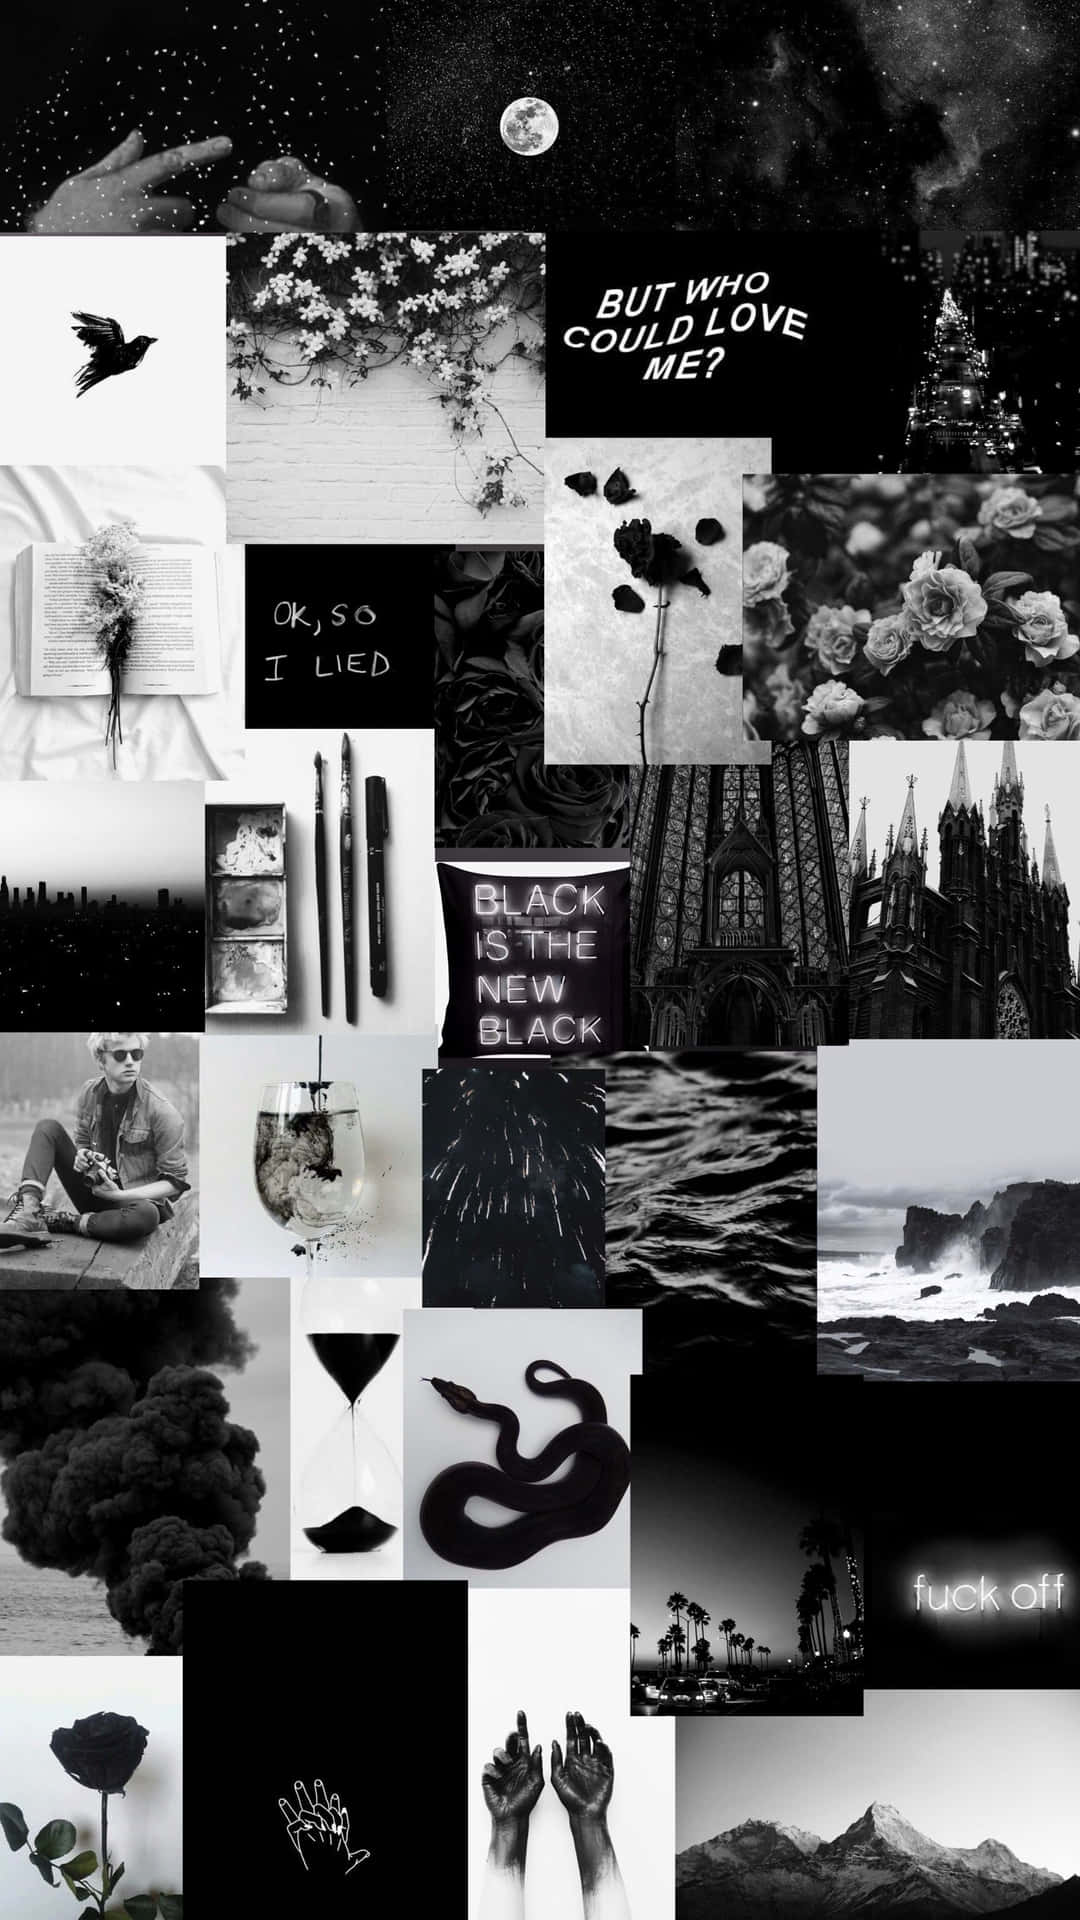 Free Black And White Collage Wallpaper Downloads, [100+] Black And White  Collage Wallpapers for FREE 